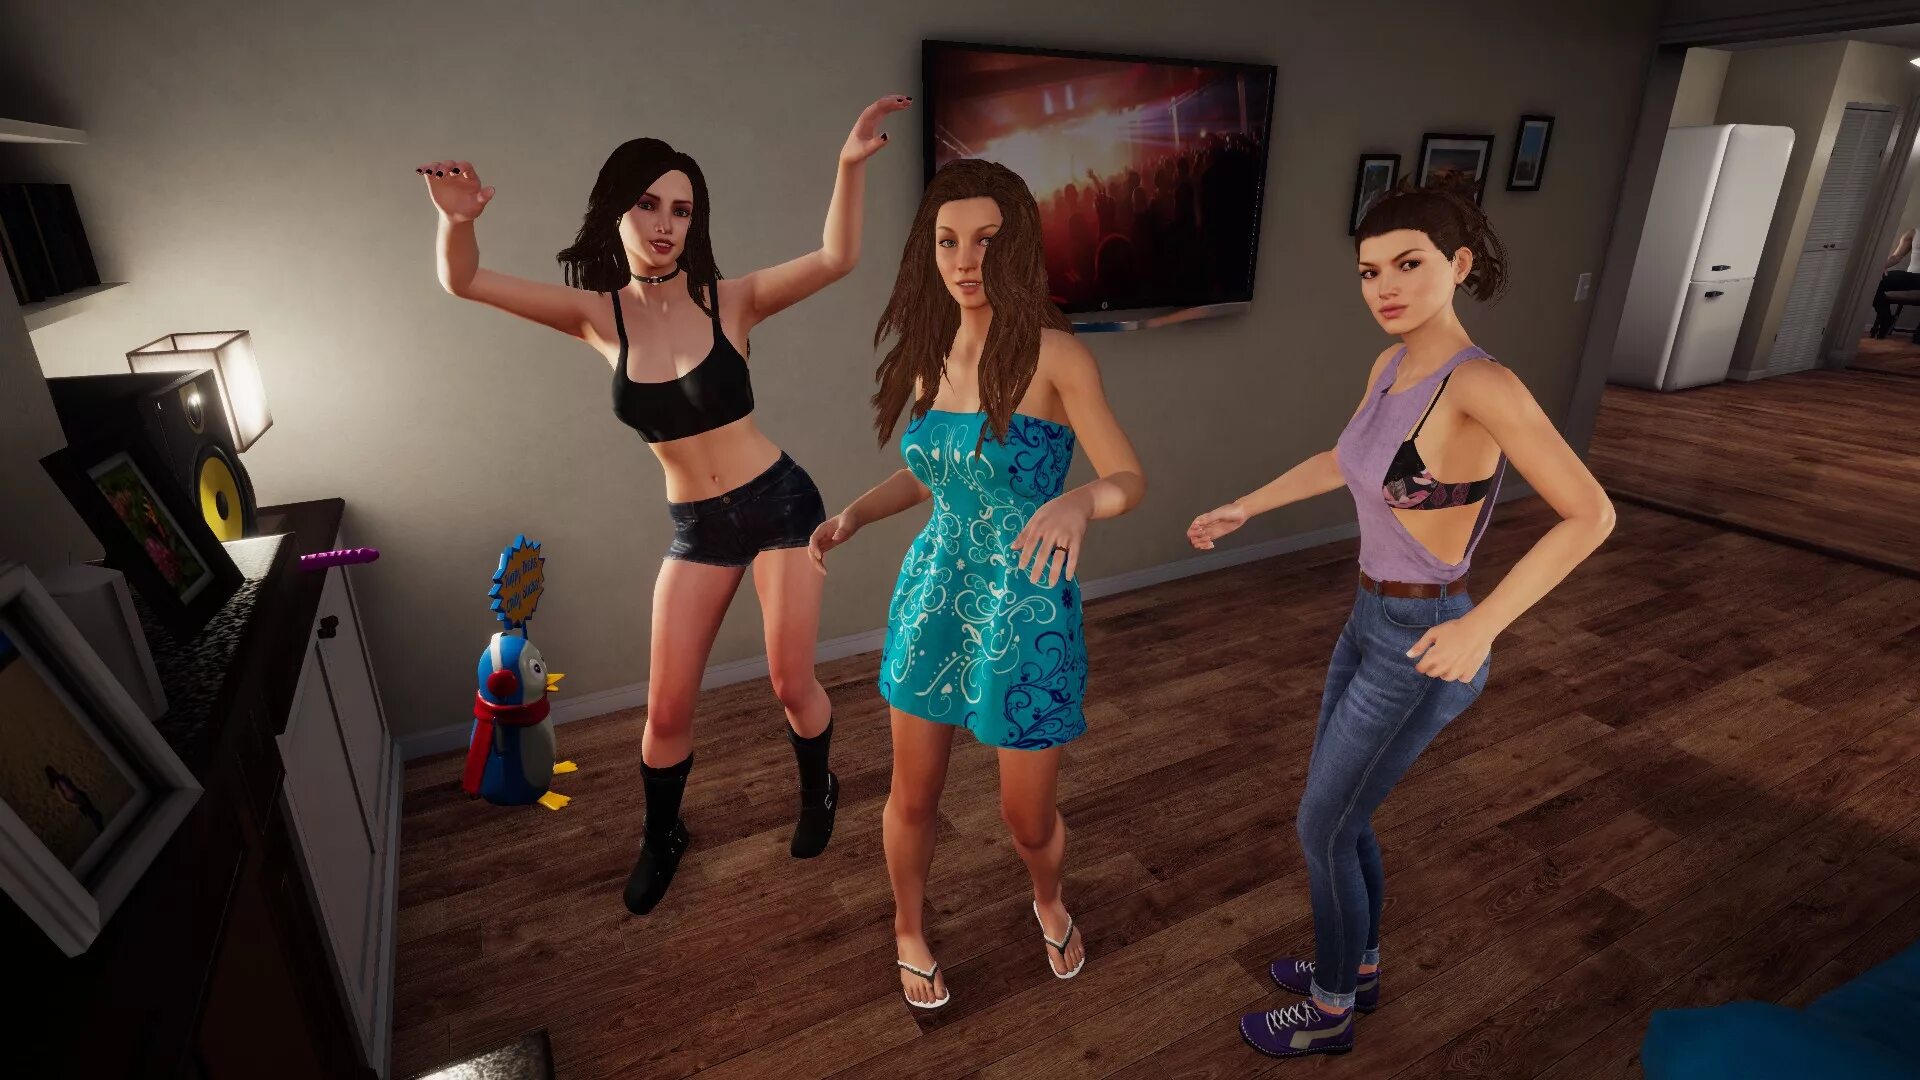 House Party игра. House.Party.Frank.early.access. House Party игра 18. Игры взрослых дам